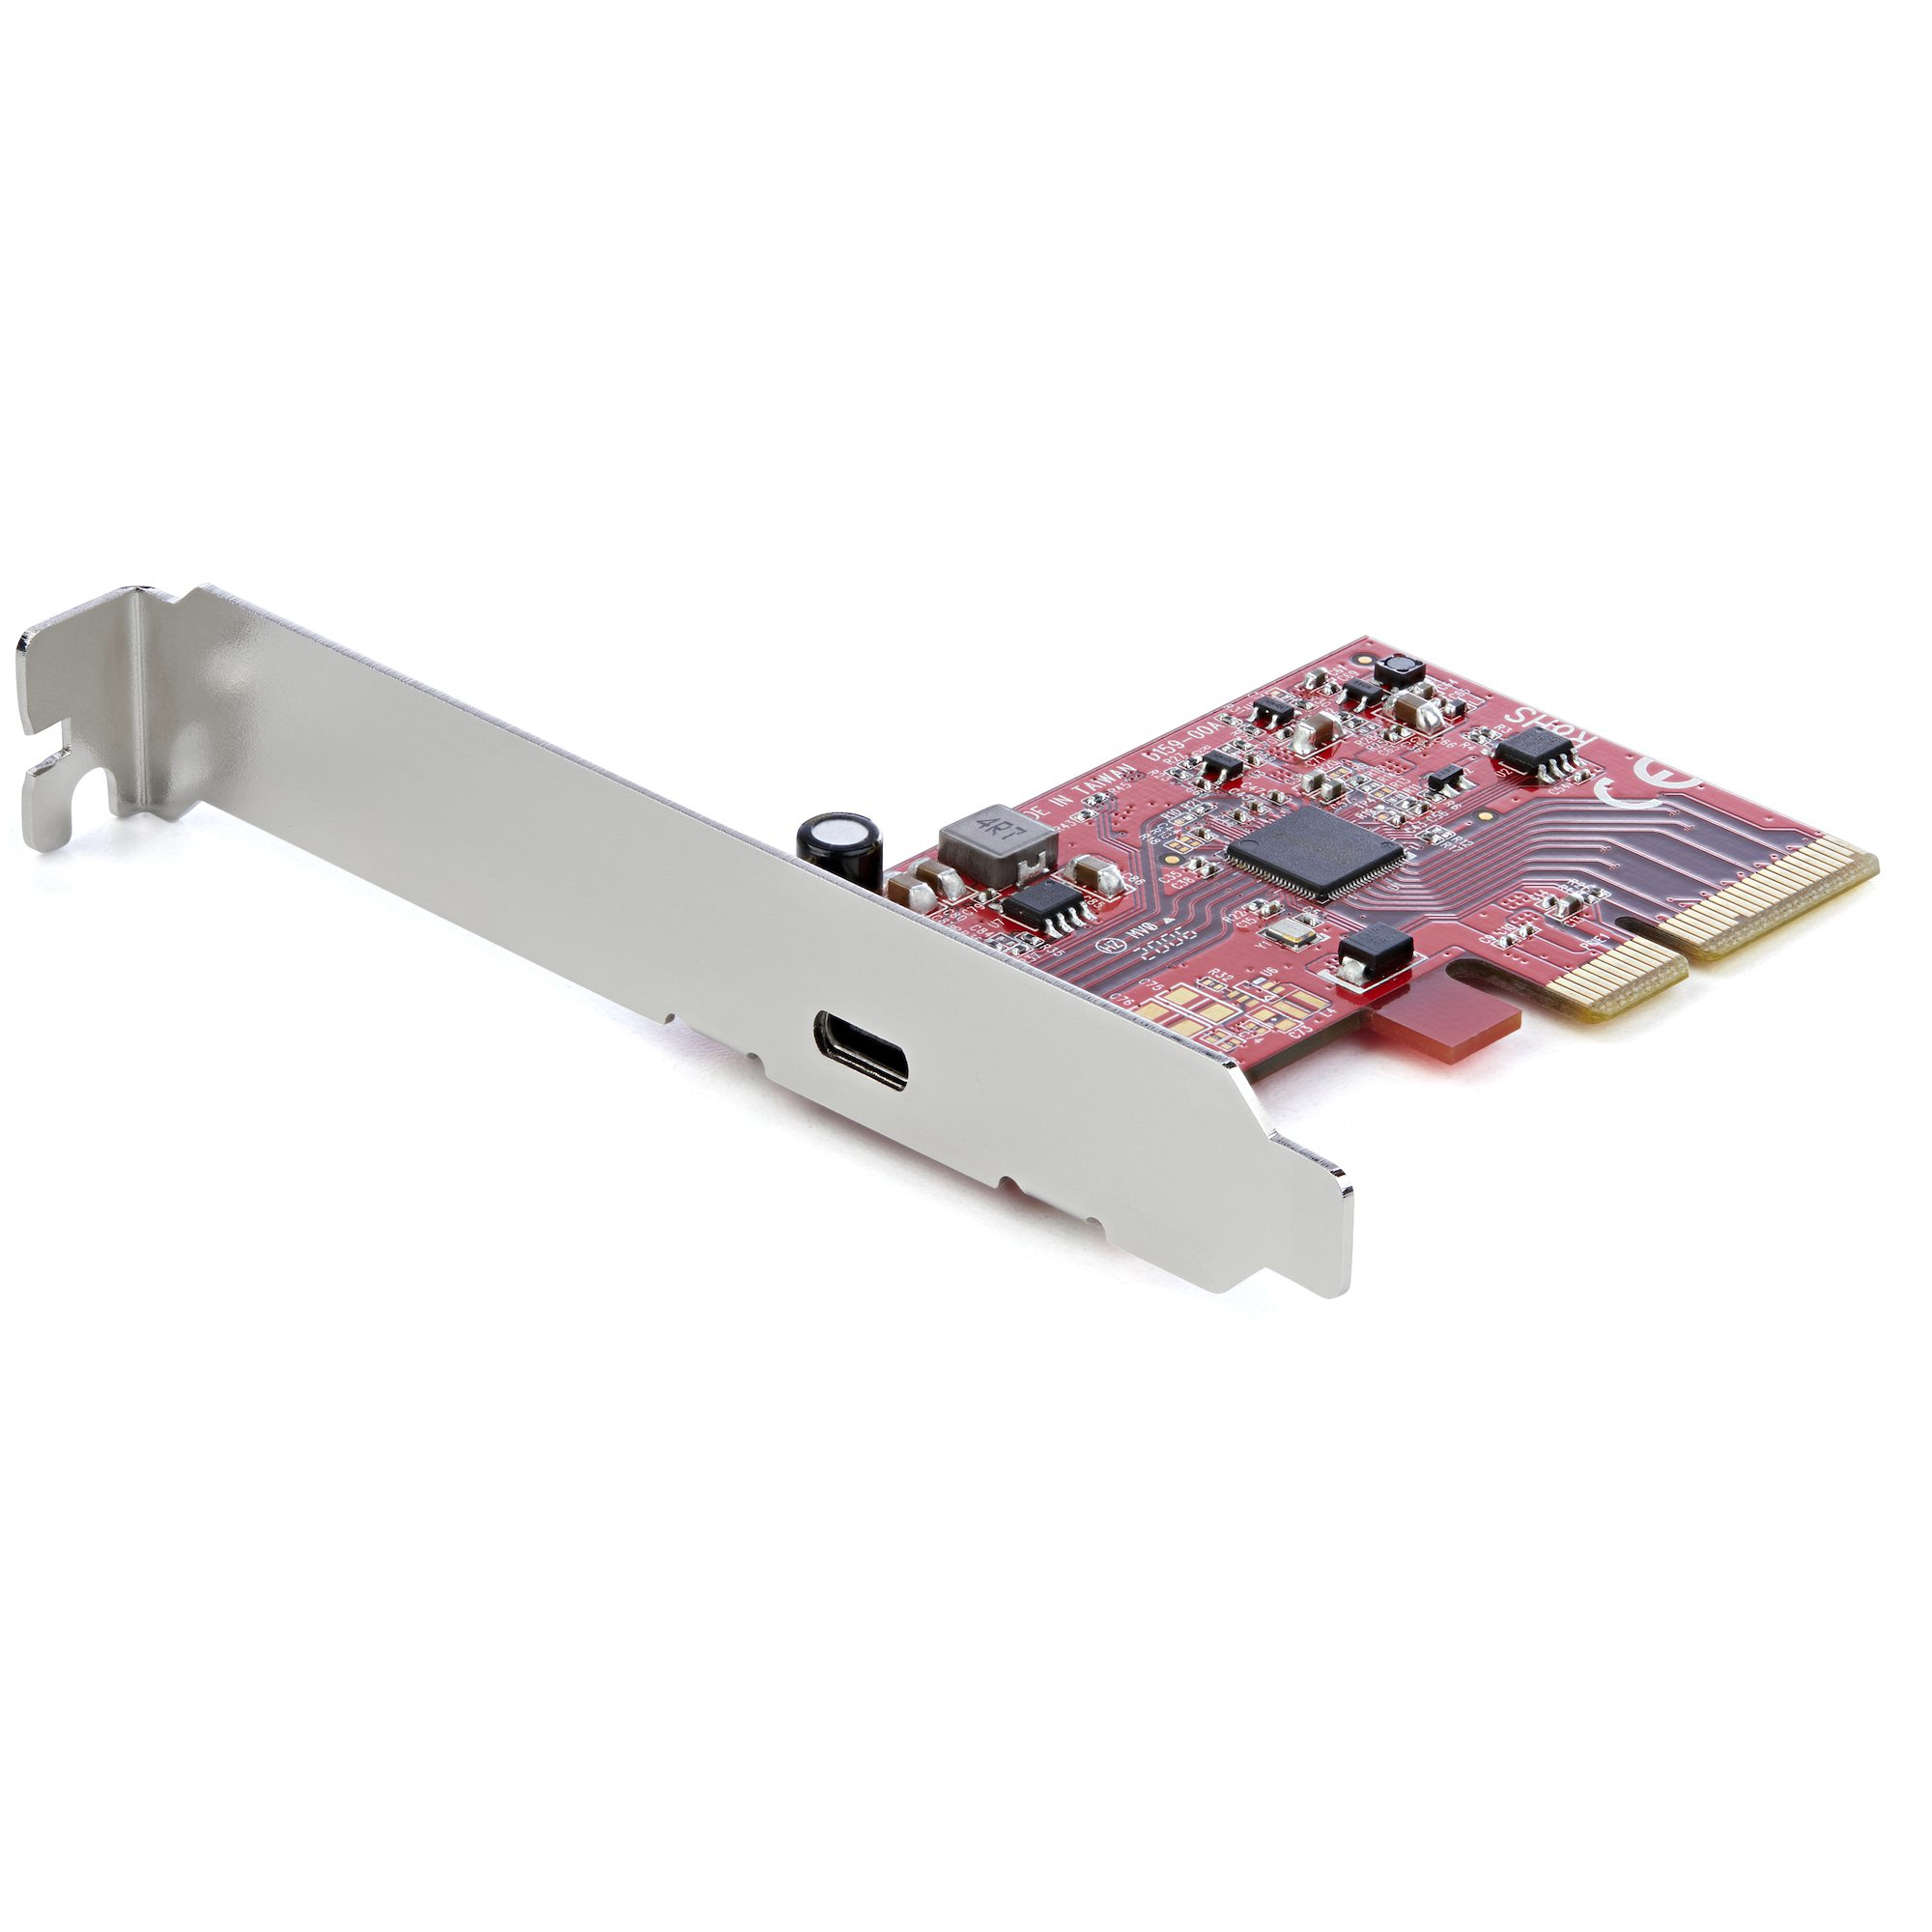 StarTech.com 1-Port USB 3.2 Gen 2x2 PCIe Card - USB-C SuperSpeed 20Gbps PCI Express 3.0 x4 Host Controller Card - USB Type-C PCIe Add-On Adapter Card - Expansion Card - Windows & Linux